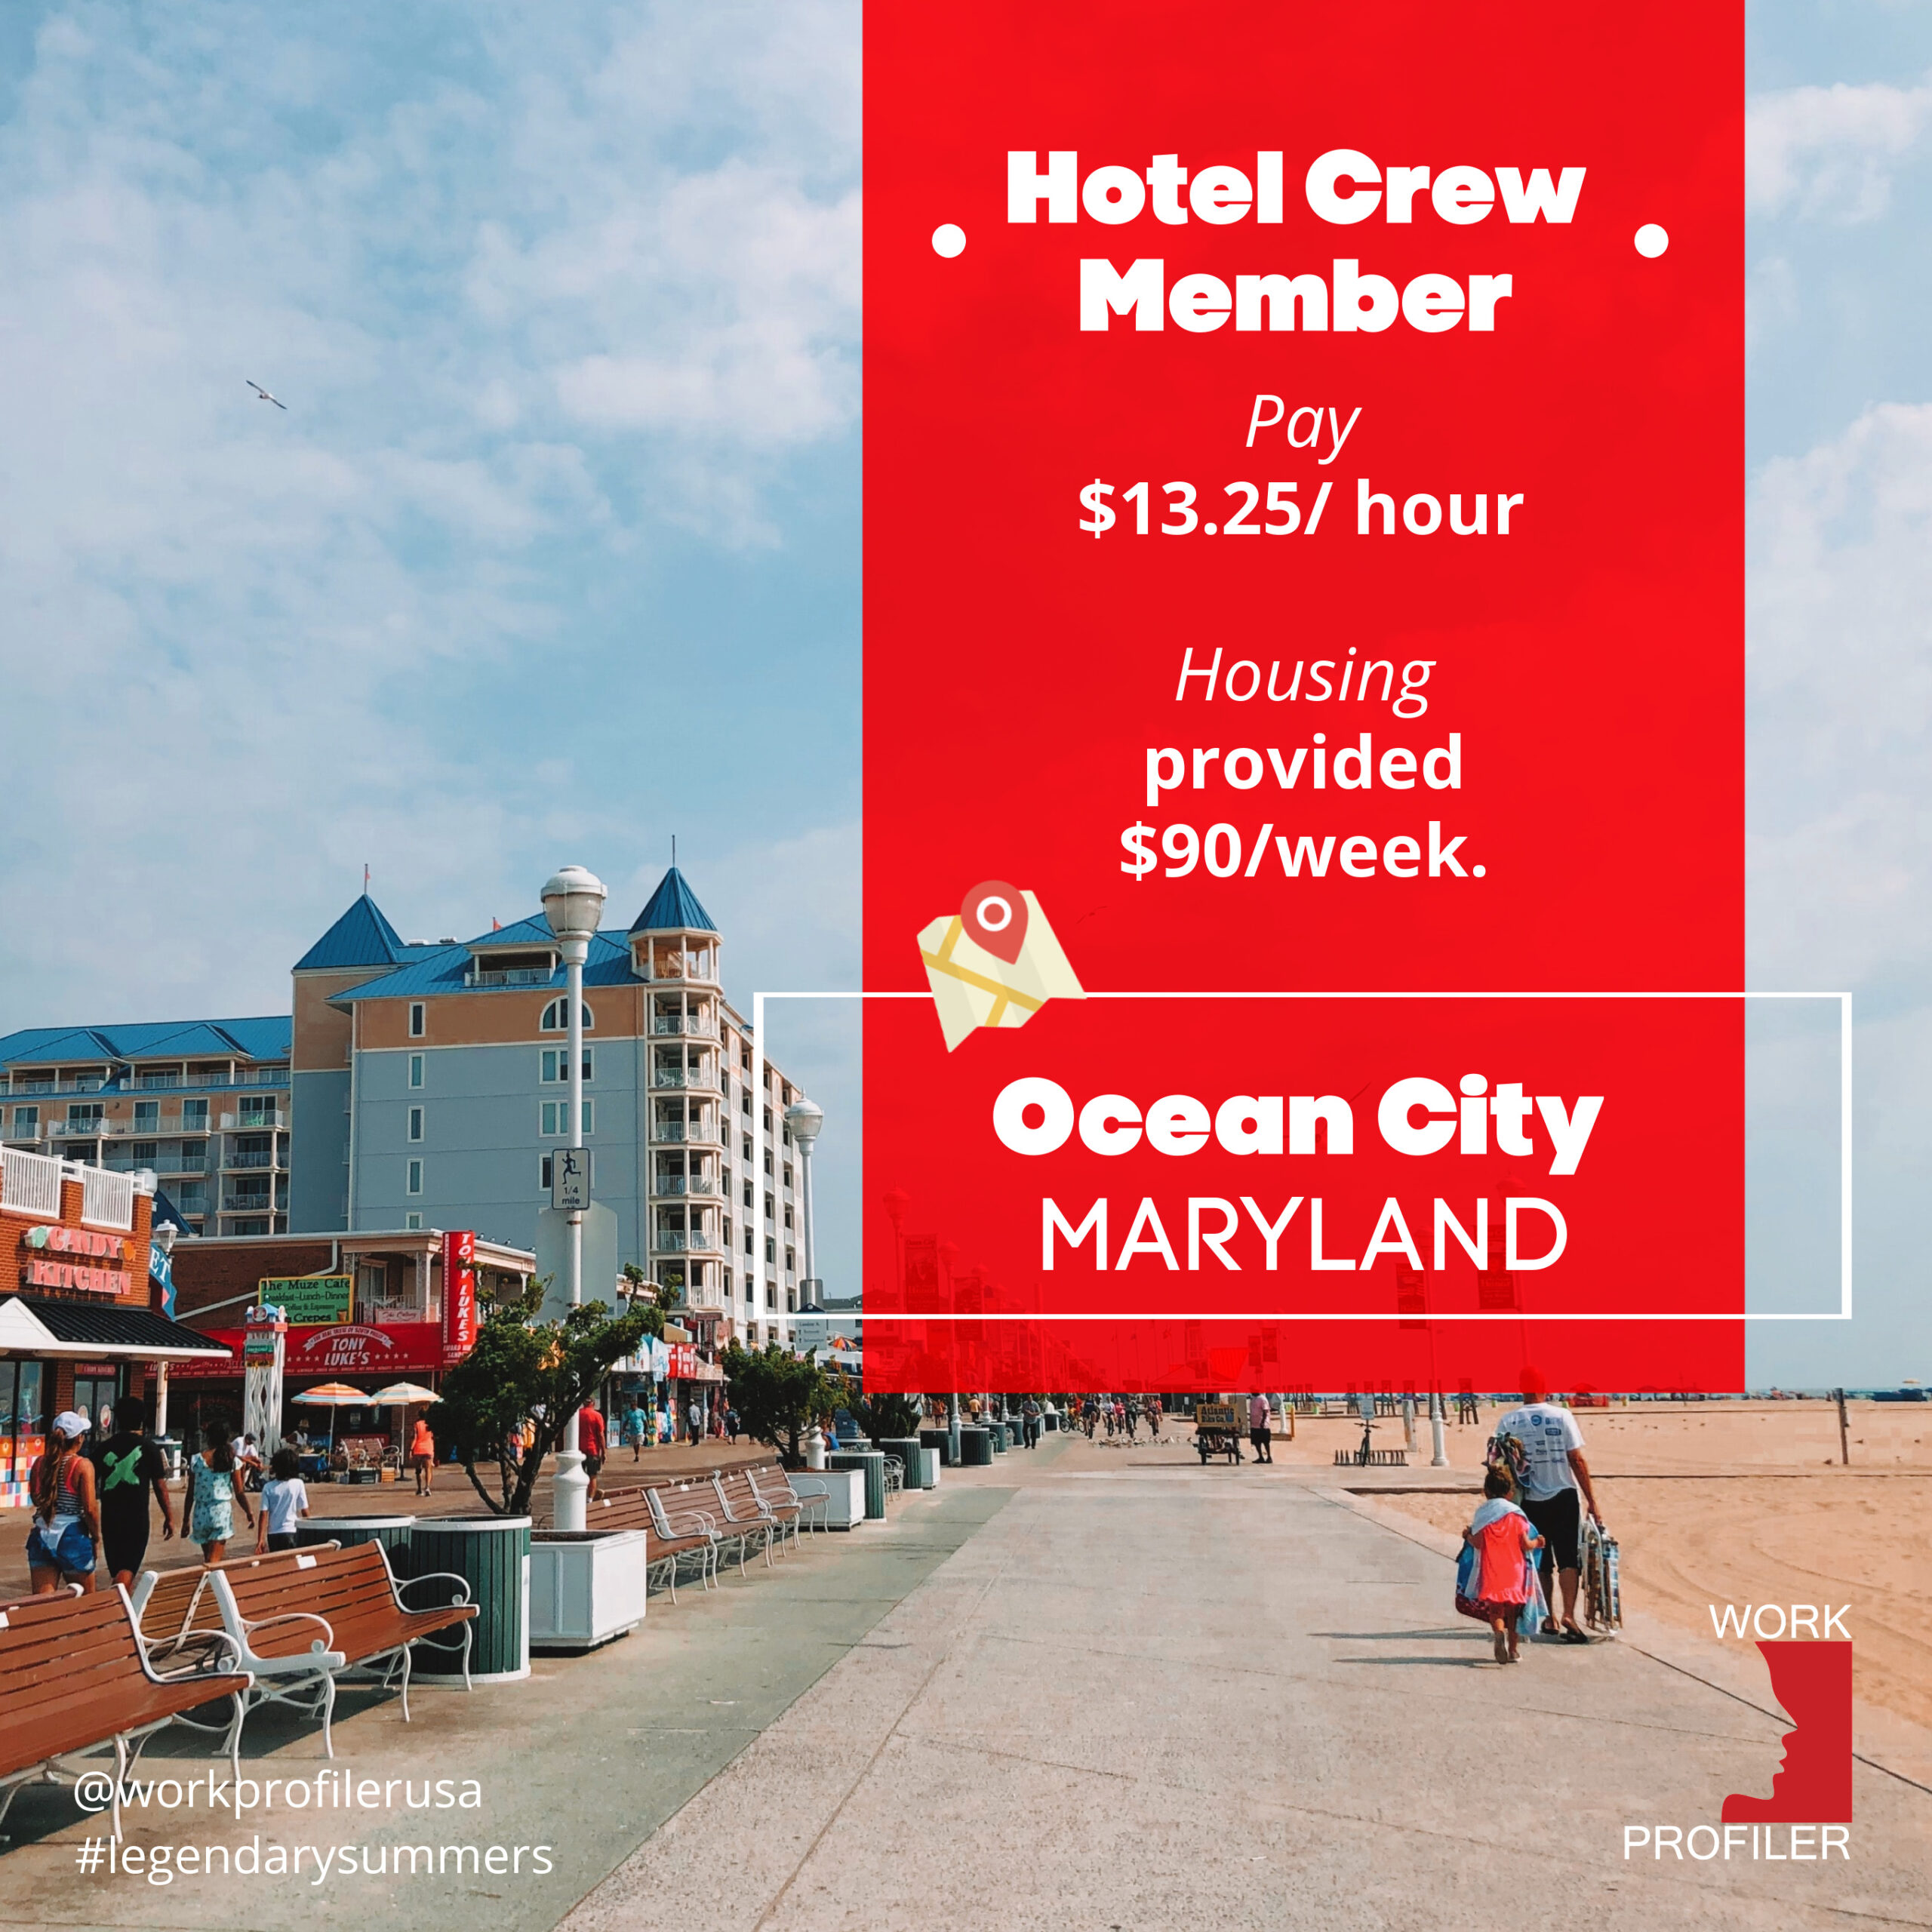 A job advertisement for a hotel crew member position in Ocean City, Maryland. The pay is $13.25 per hour and housing is provided for $90 per week.